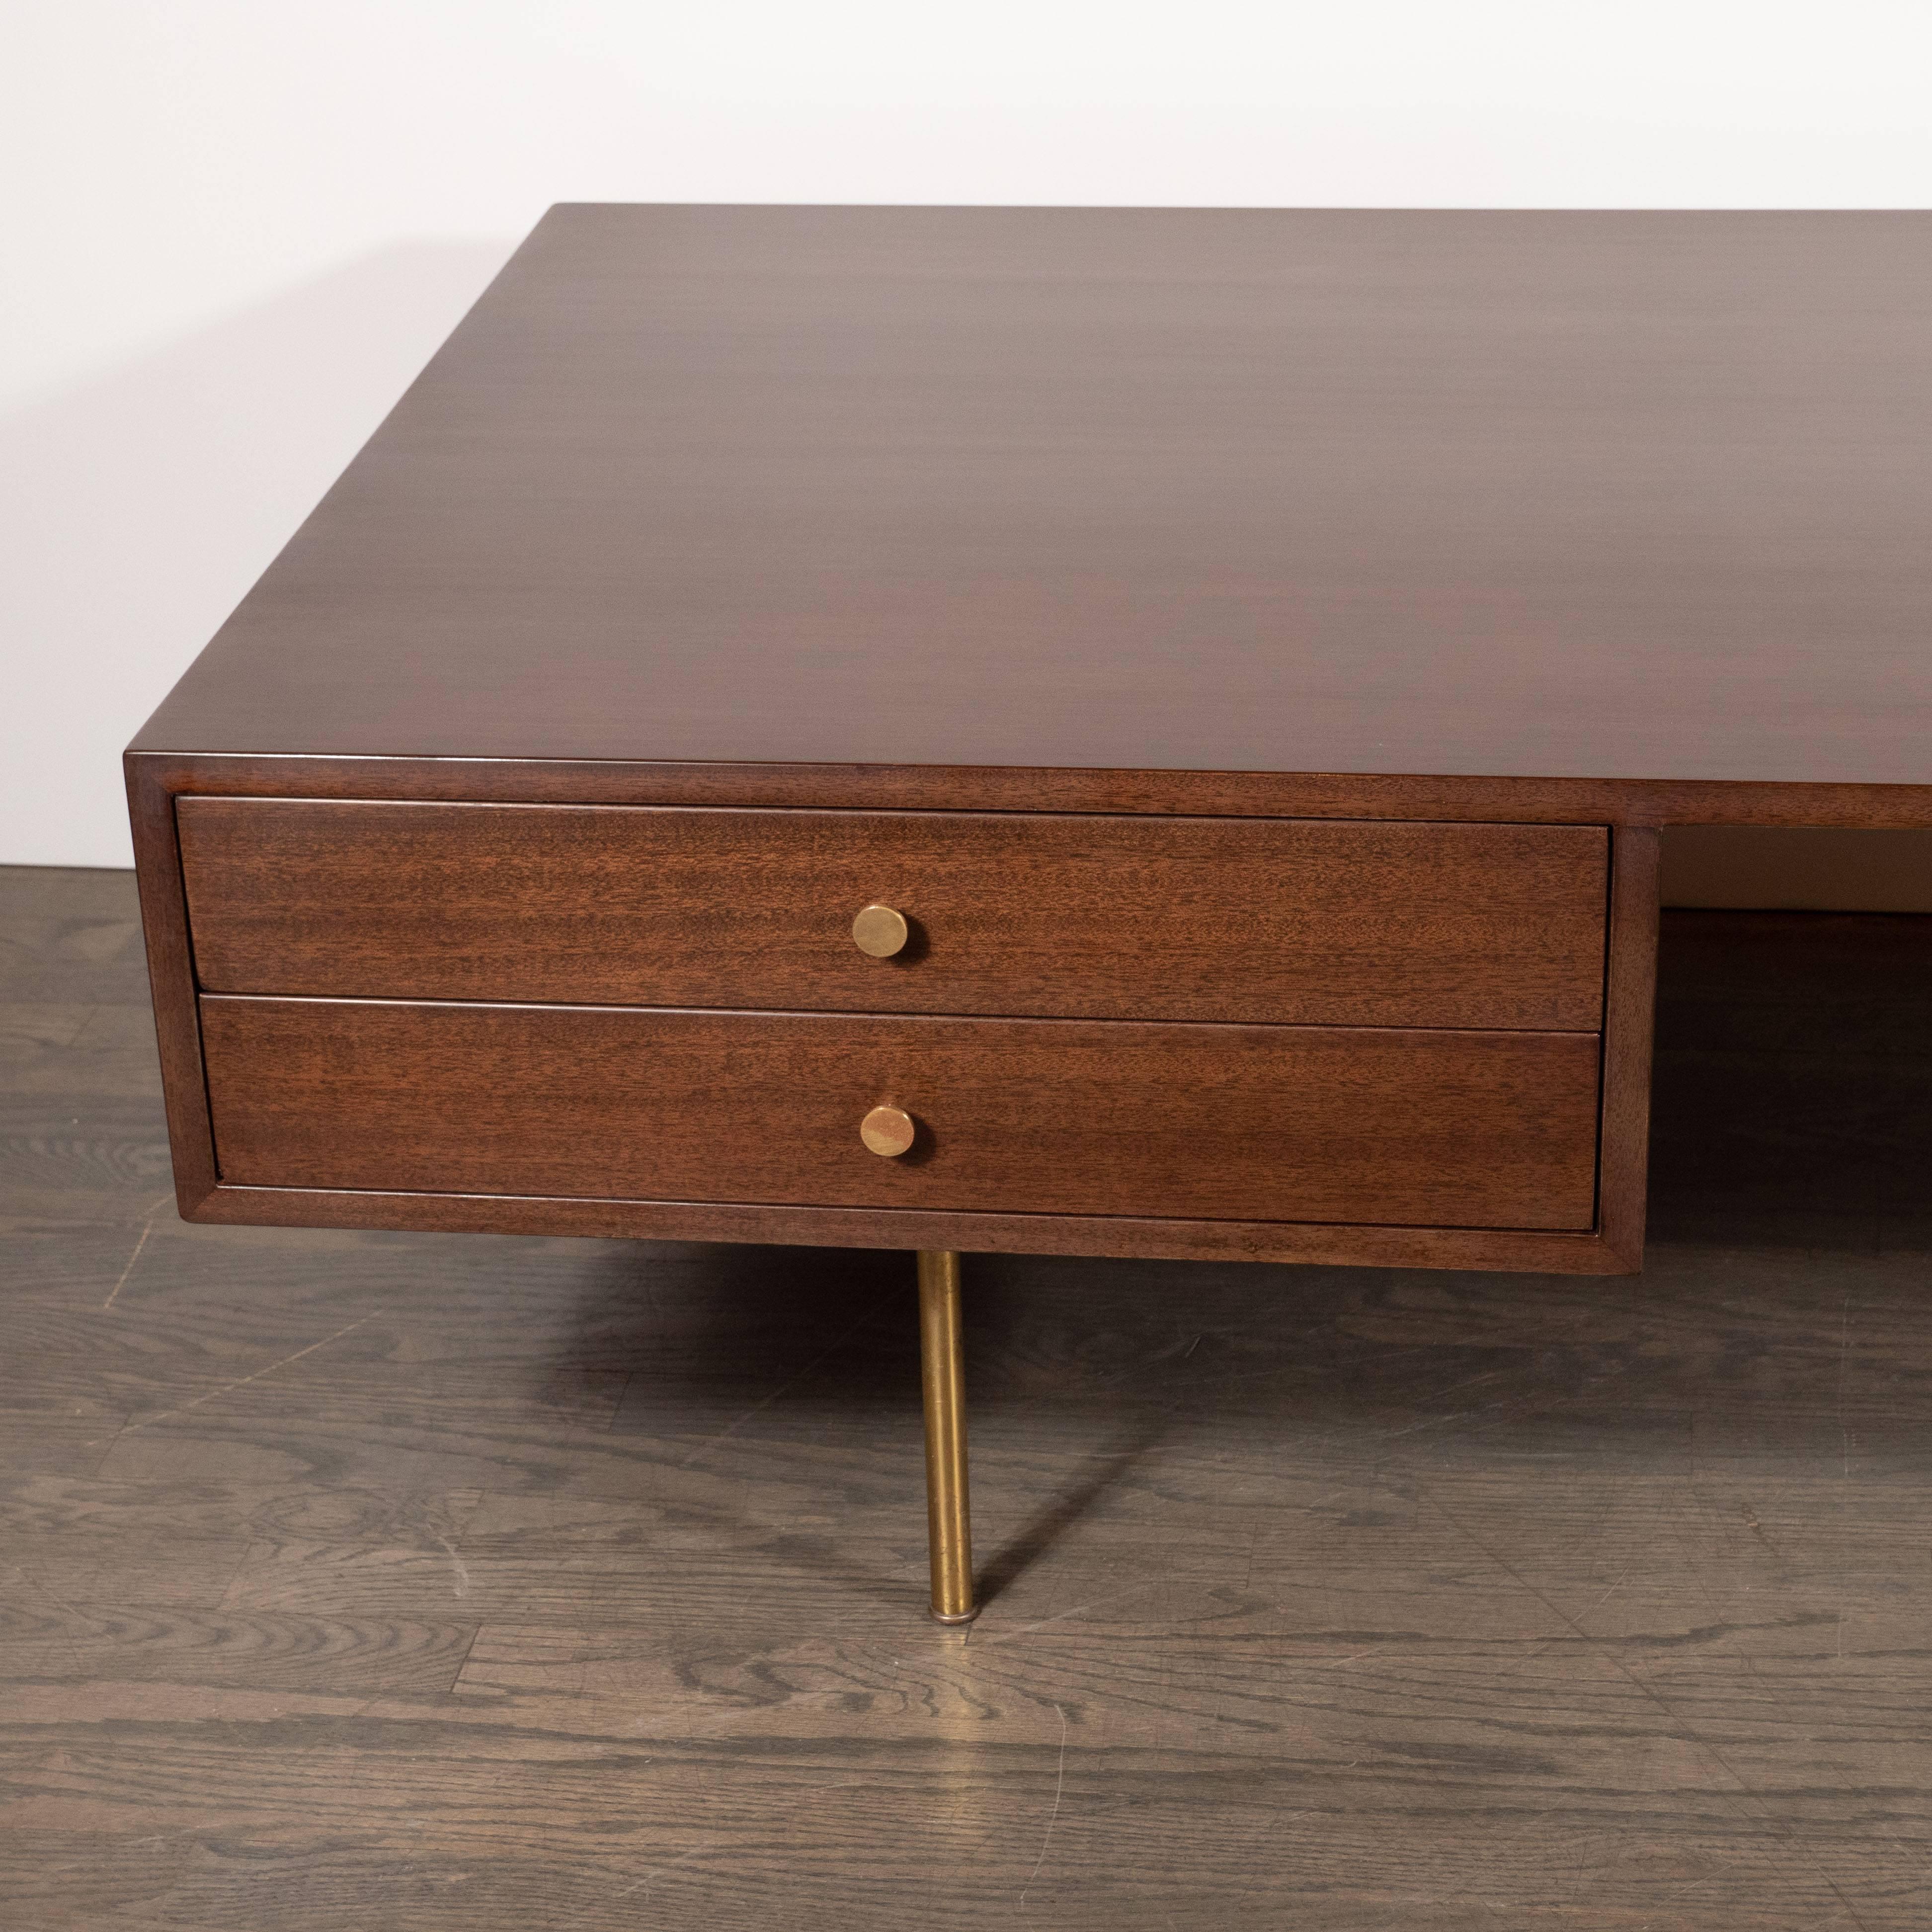 Mid-20th Century Mid-Century Modern Two-Drawer Cocktail Table in Walnut and Brass, Harvey Probber For Sale